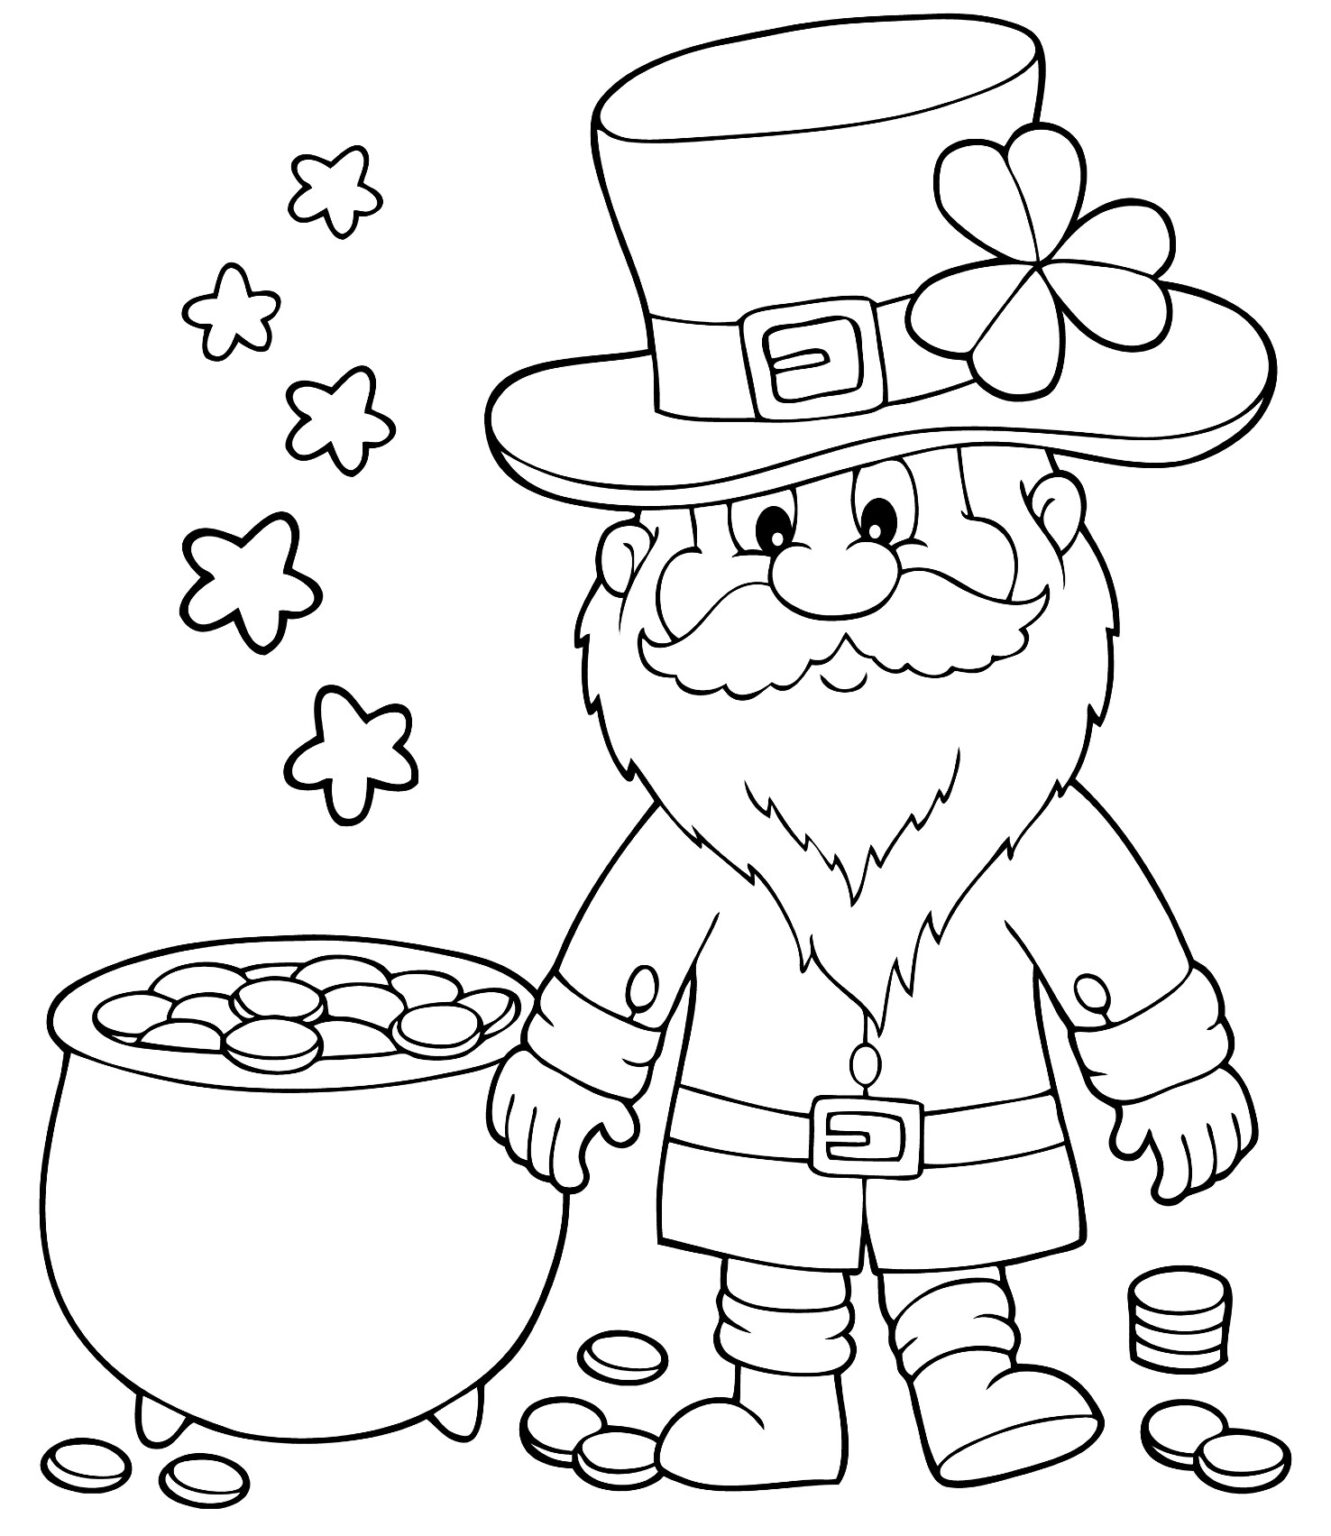 st-patrick-s-day-coloring-page-beautiful-free-st-patrick-s-day-coloring